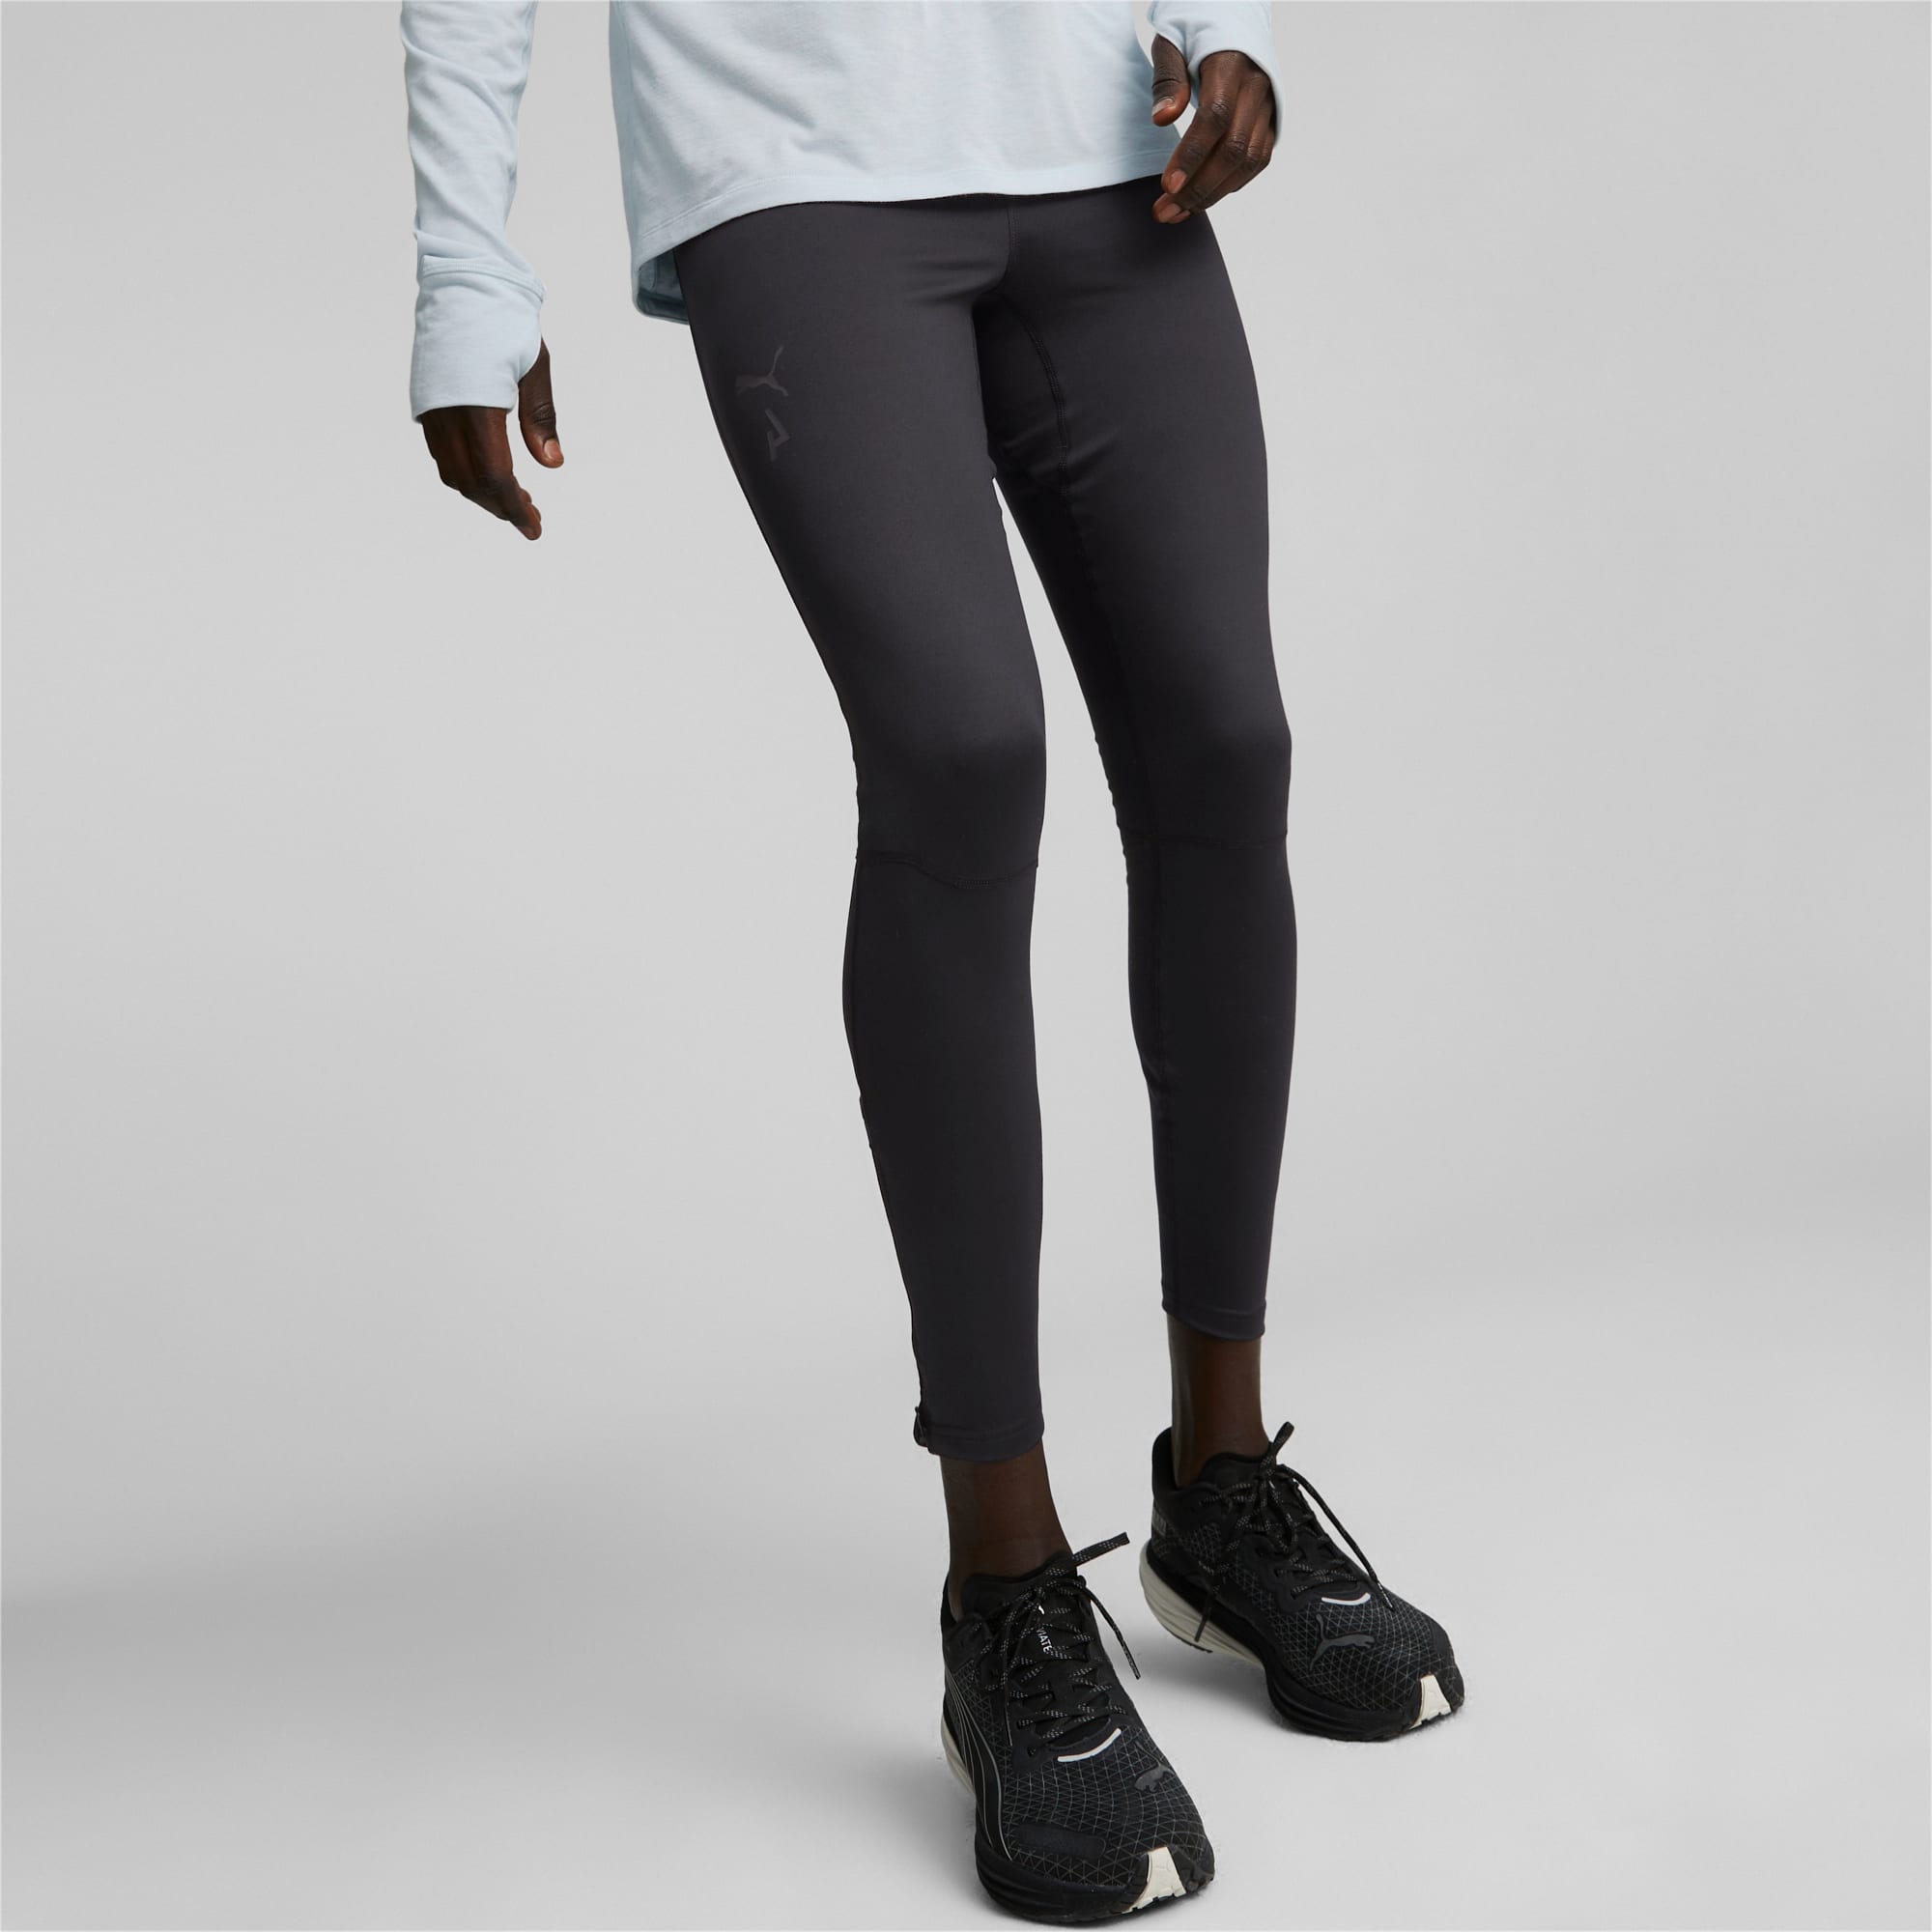 Mens White Running Tights | vlr.eng.br